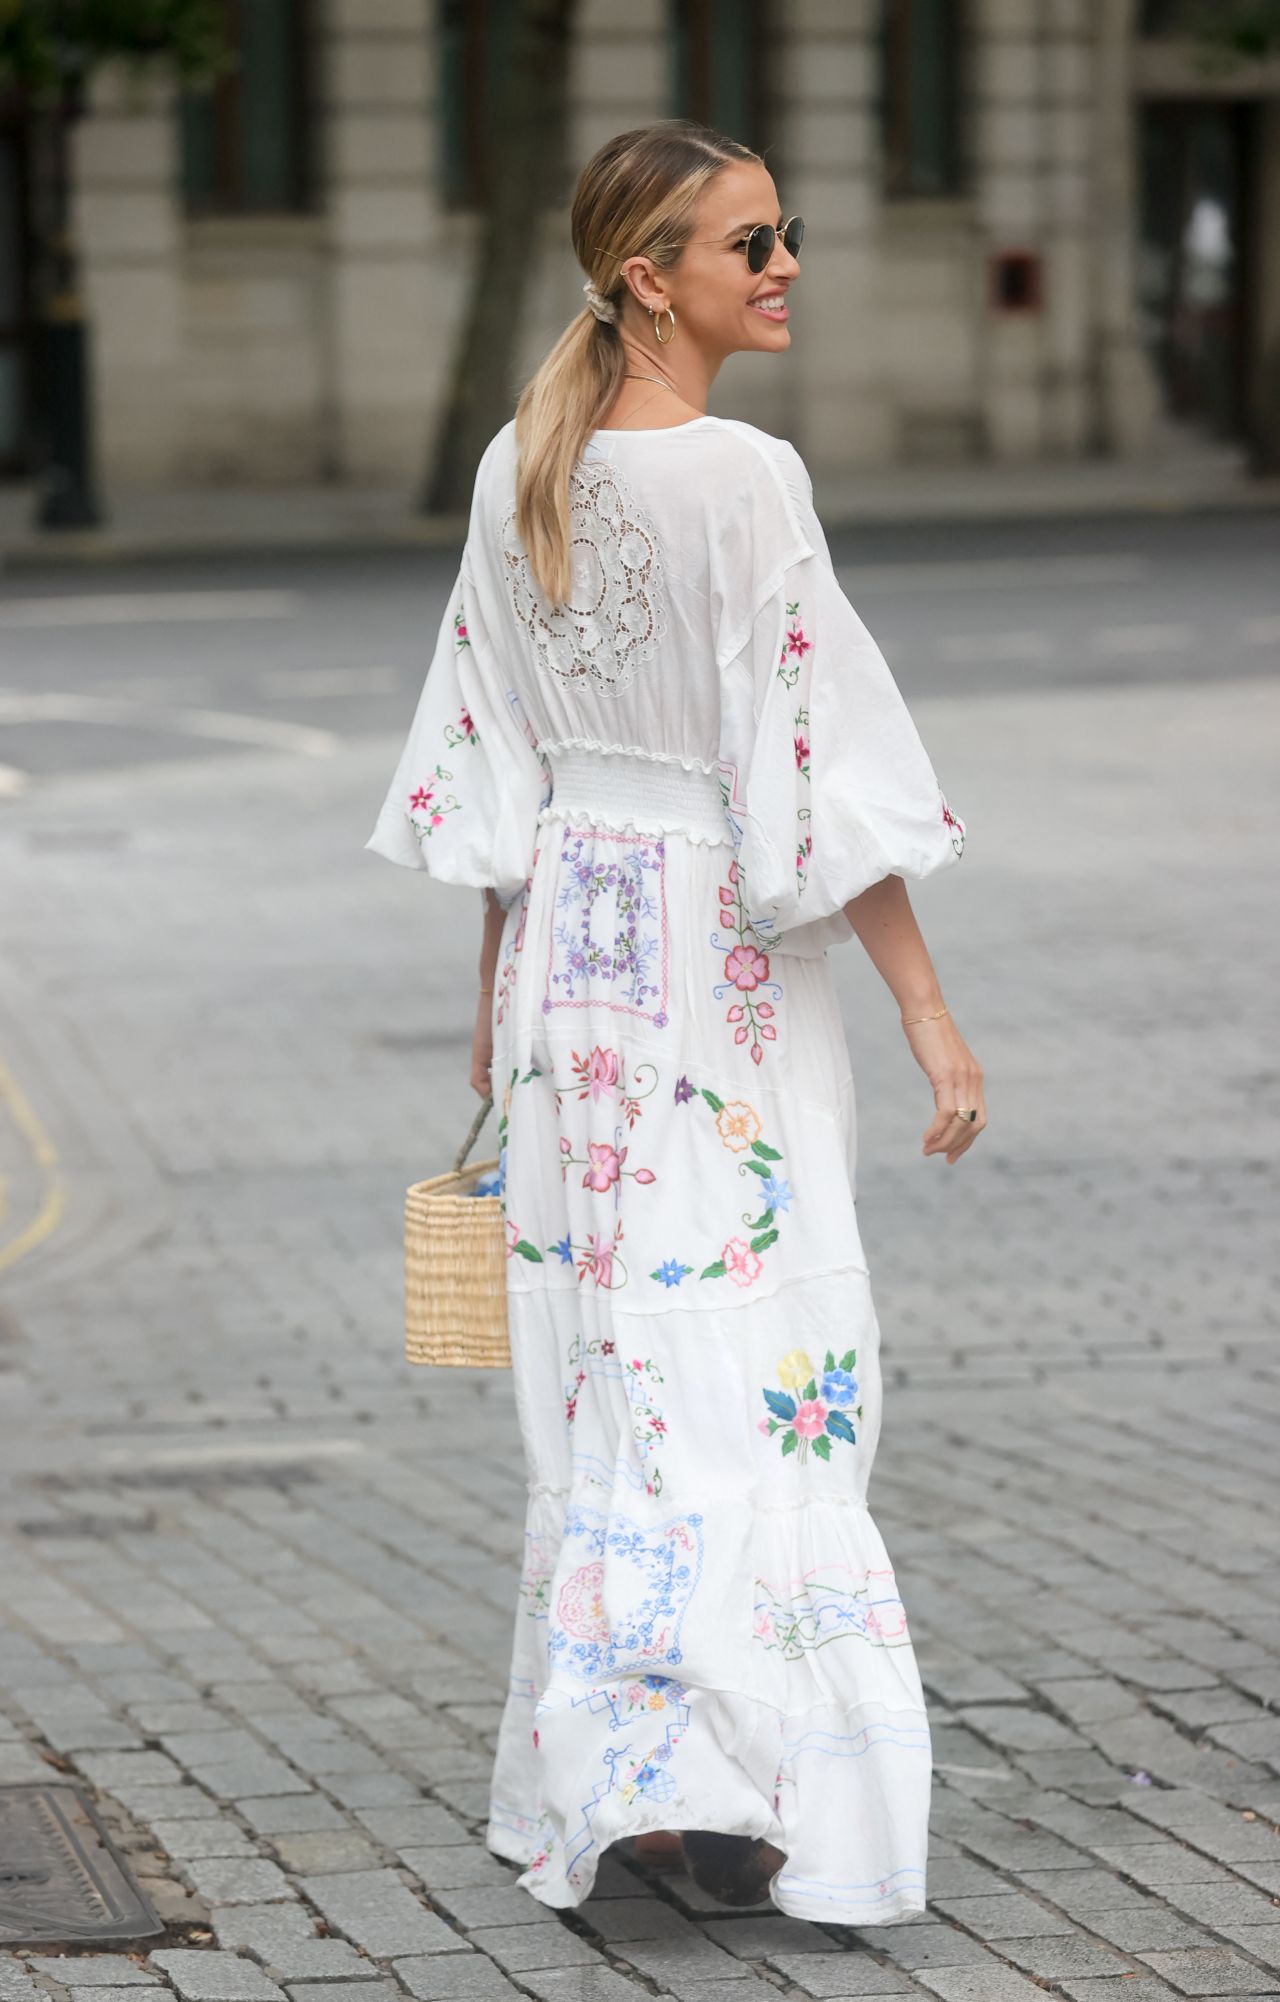 Vogue Williams in a White Summer Floral Dress - London 08/01/2021 ...